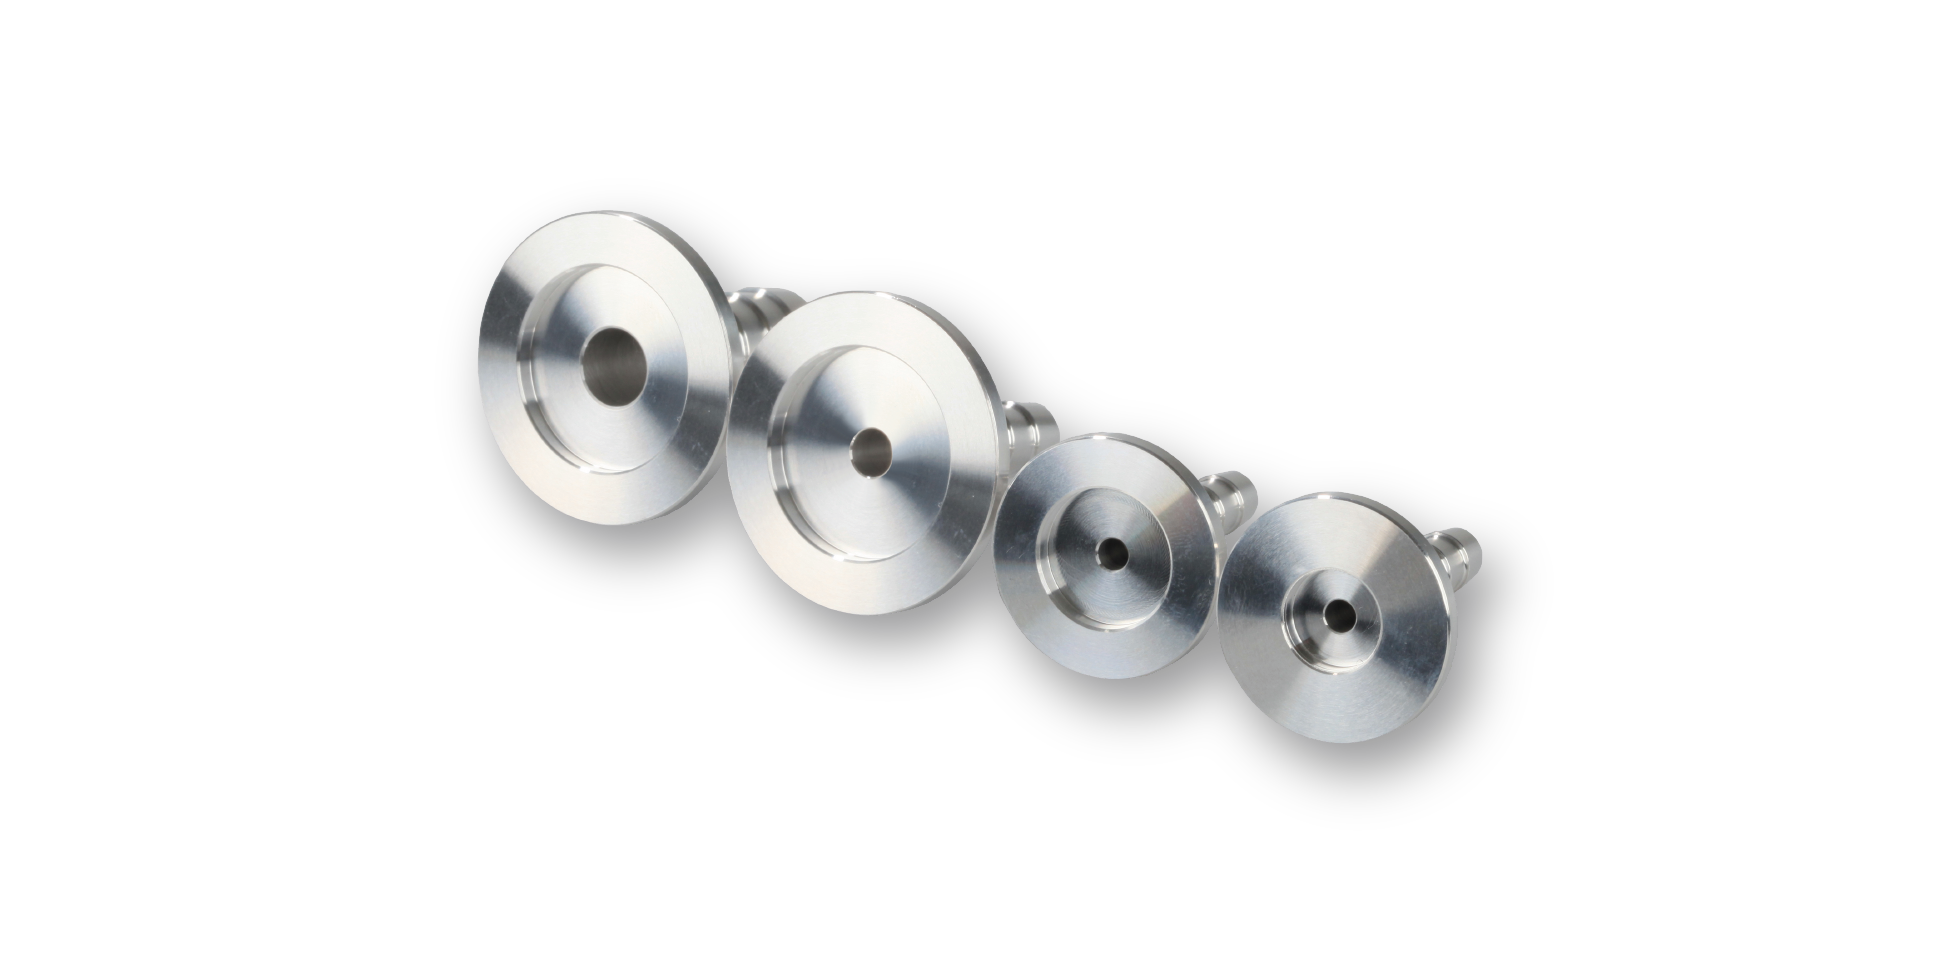 Flanges & other small flange components